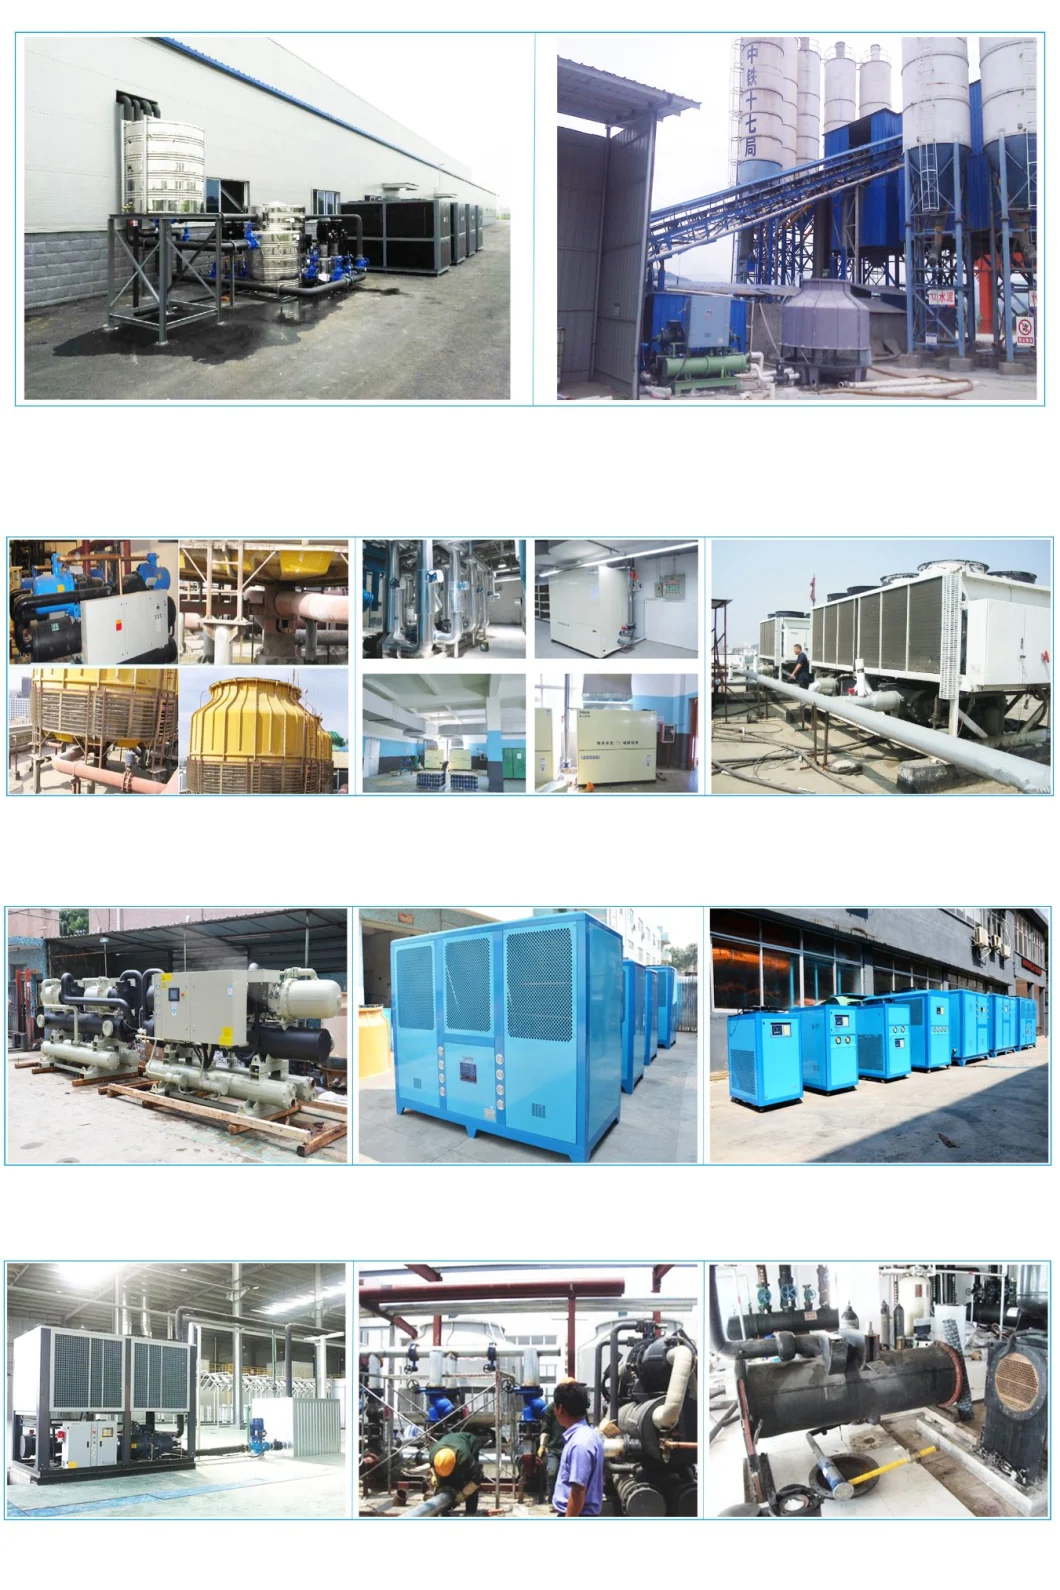 Customizable Industrial Water Tank or Cooling Chiller